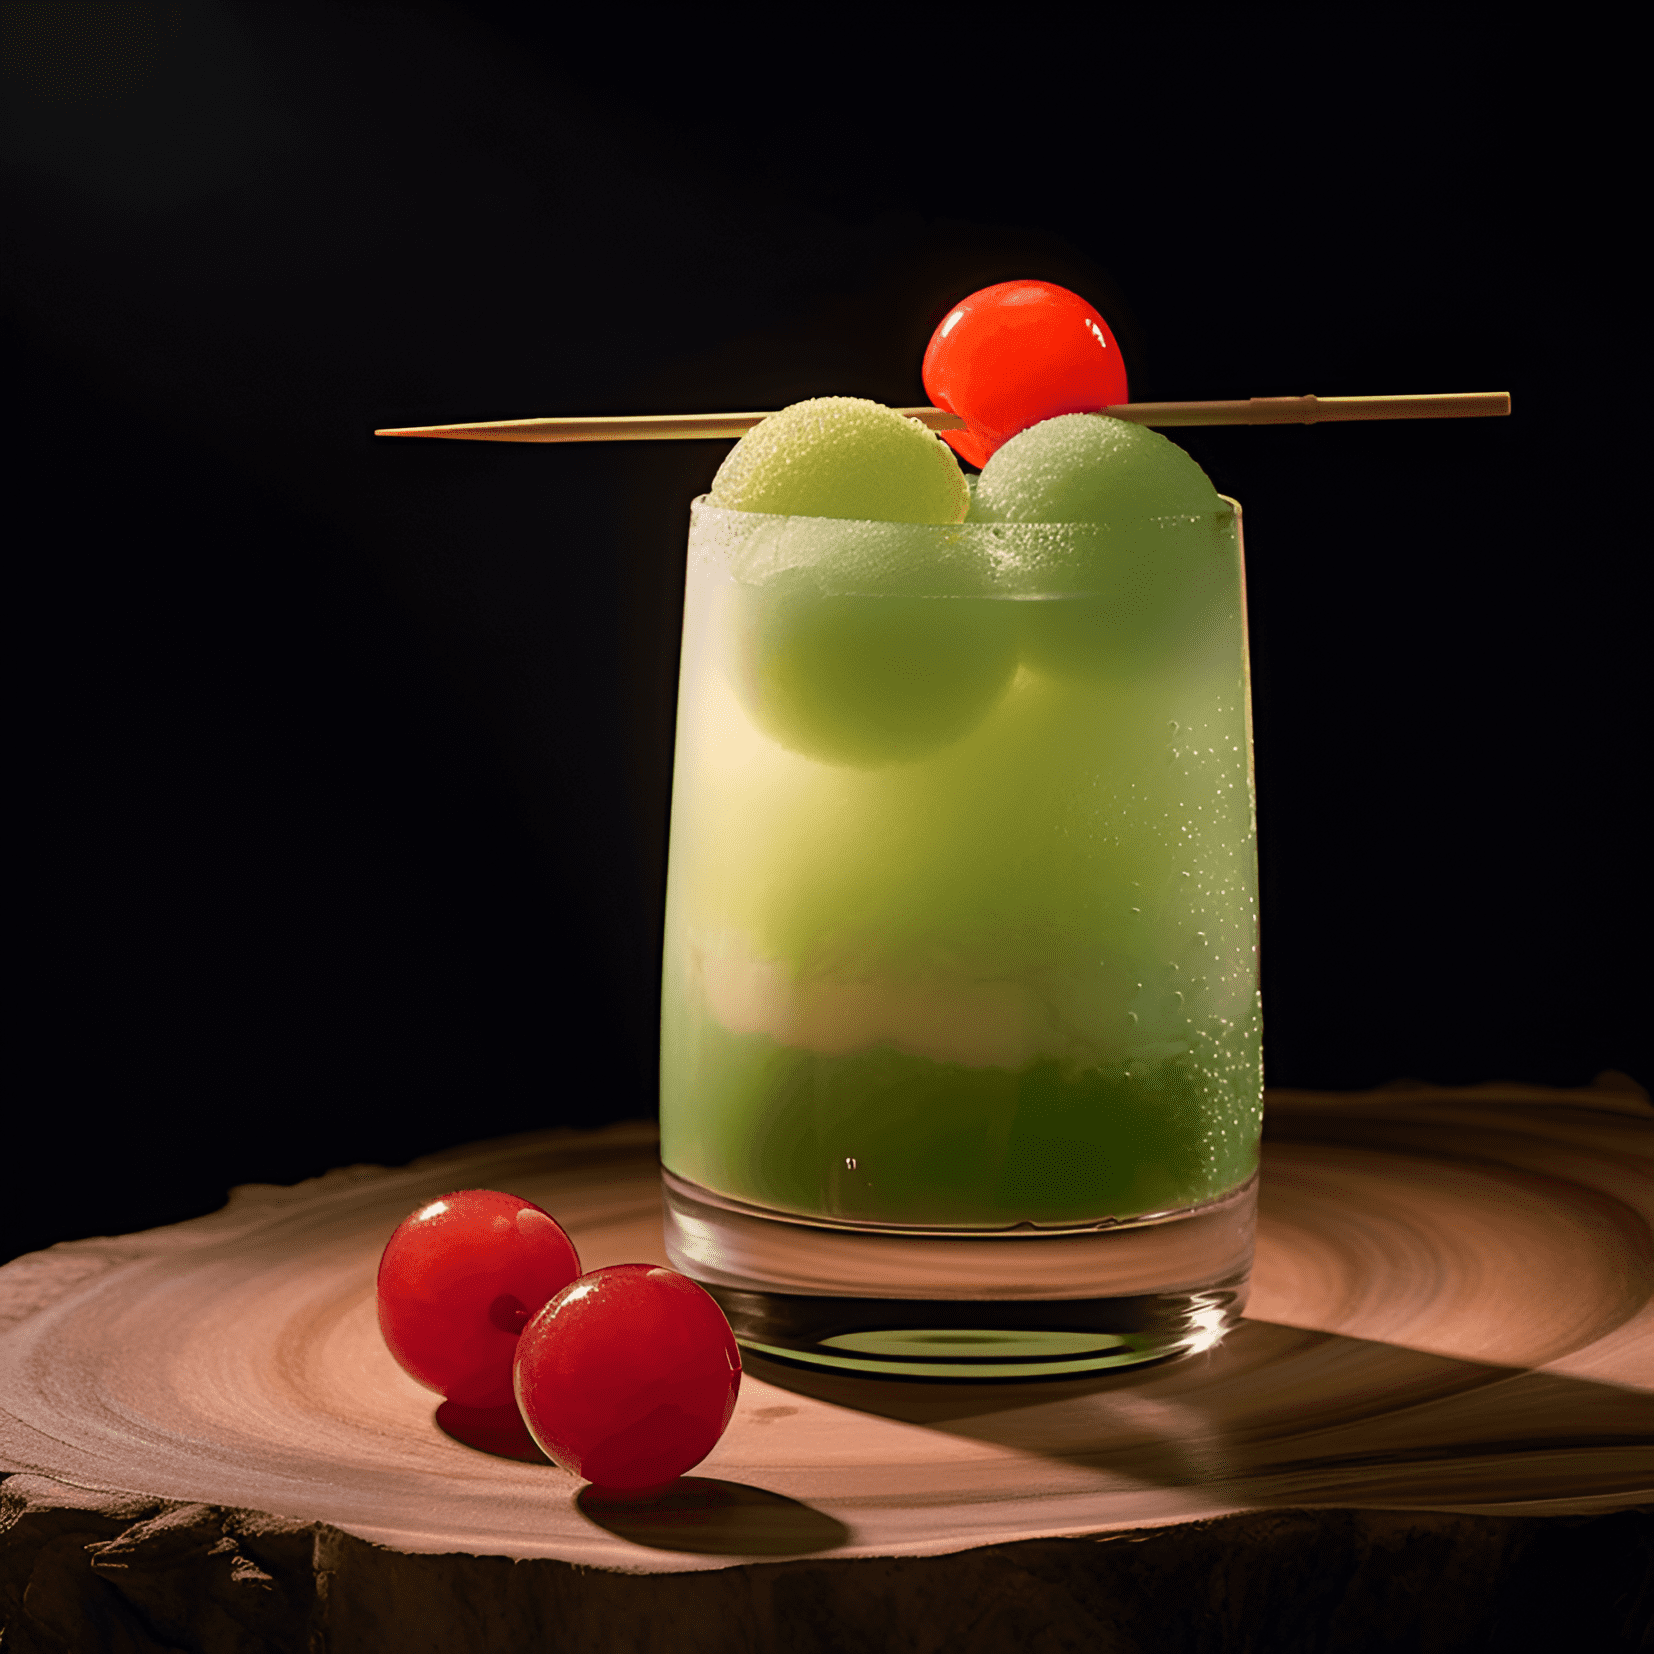 Melon Ball Cocktail Recipe - The Melon Ball cocktail is a sweet, fruity, and refreshing drink with a vibrant green color. The combination of Midori melon liqueur, vodka, and pineapple juice creates a well-balanced flavor profile that is neither too strong nor too light. The sweetness of the Midori is balanced by the tartness of the pineapple juice, while the vodka adds a subtle kick.